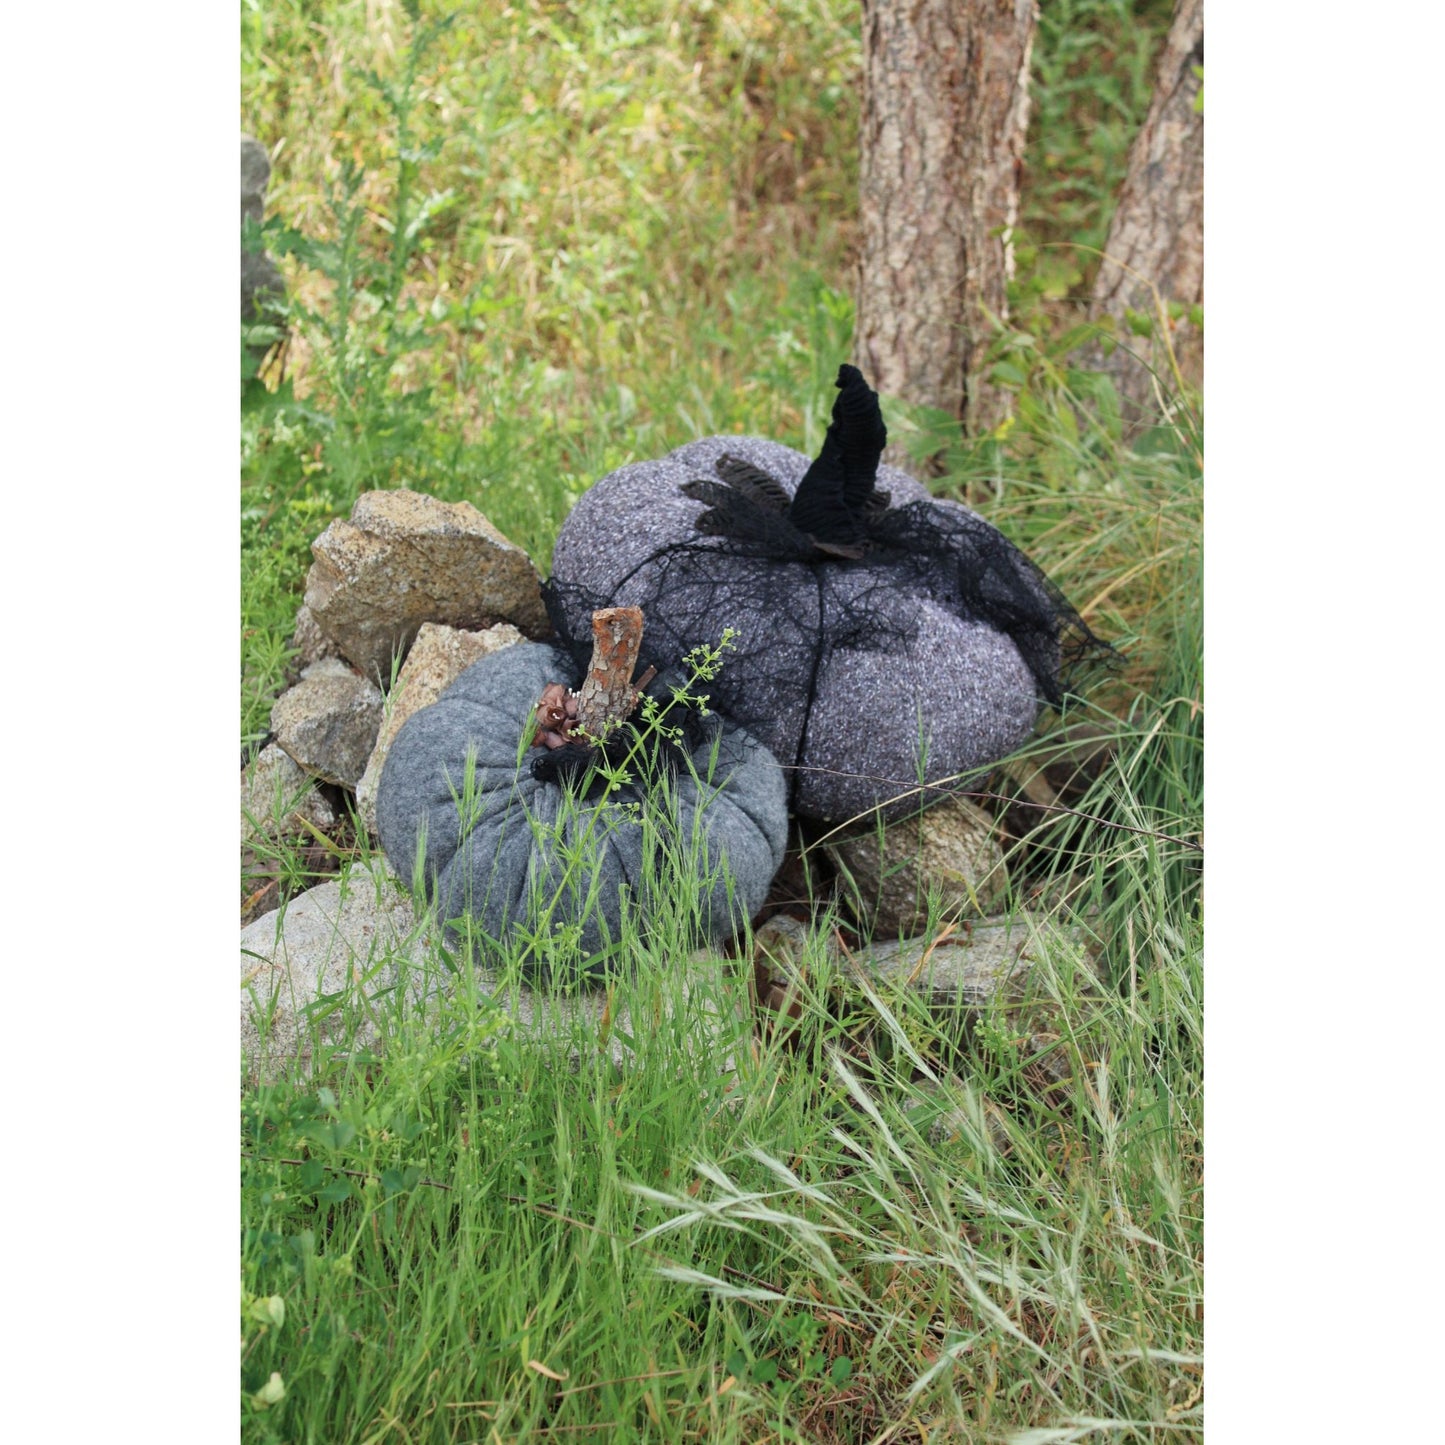 Extra Large Knit Pumpkin Pillow Pouf in Gray Tweed With Black Spiderweb Lace